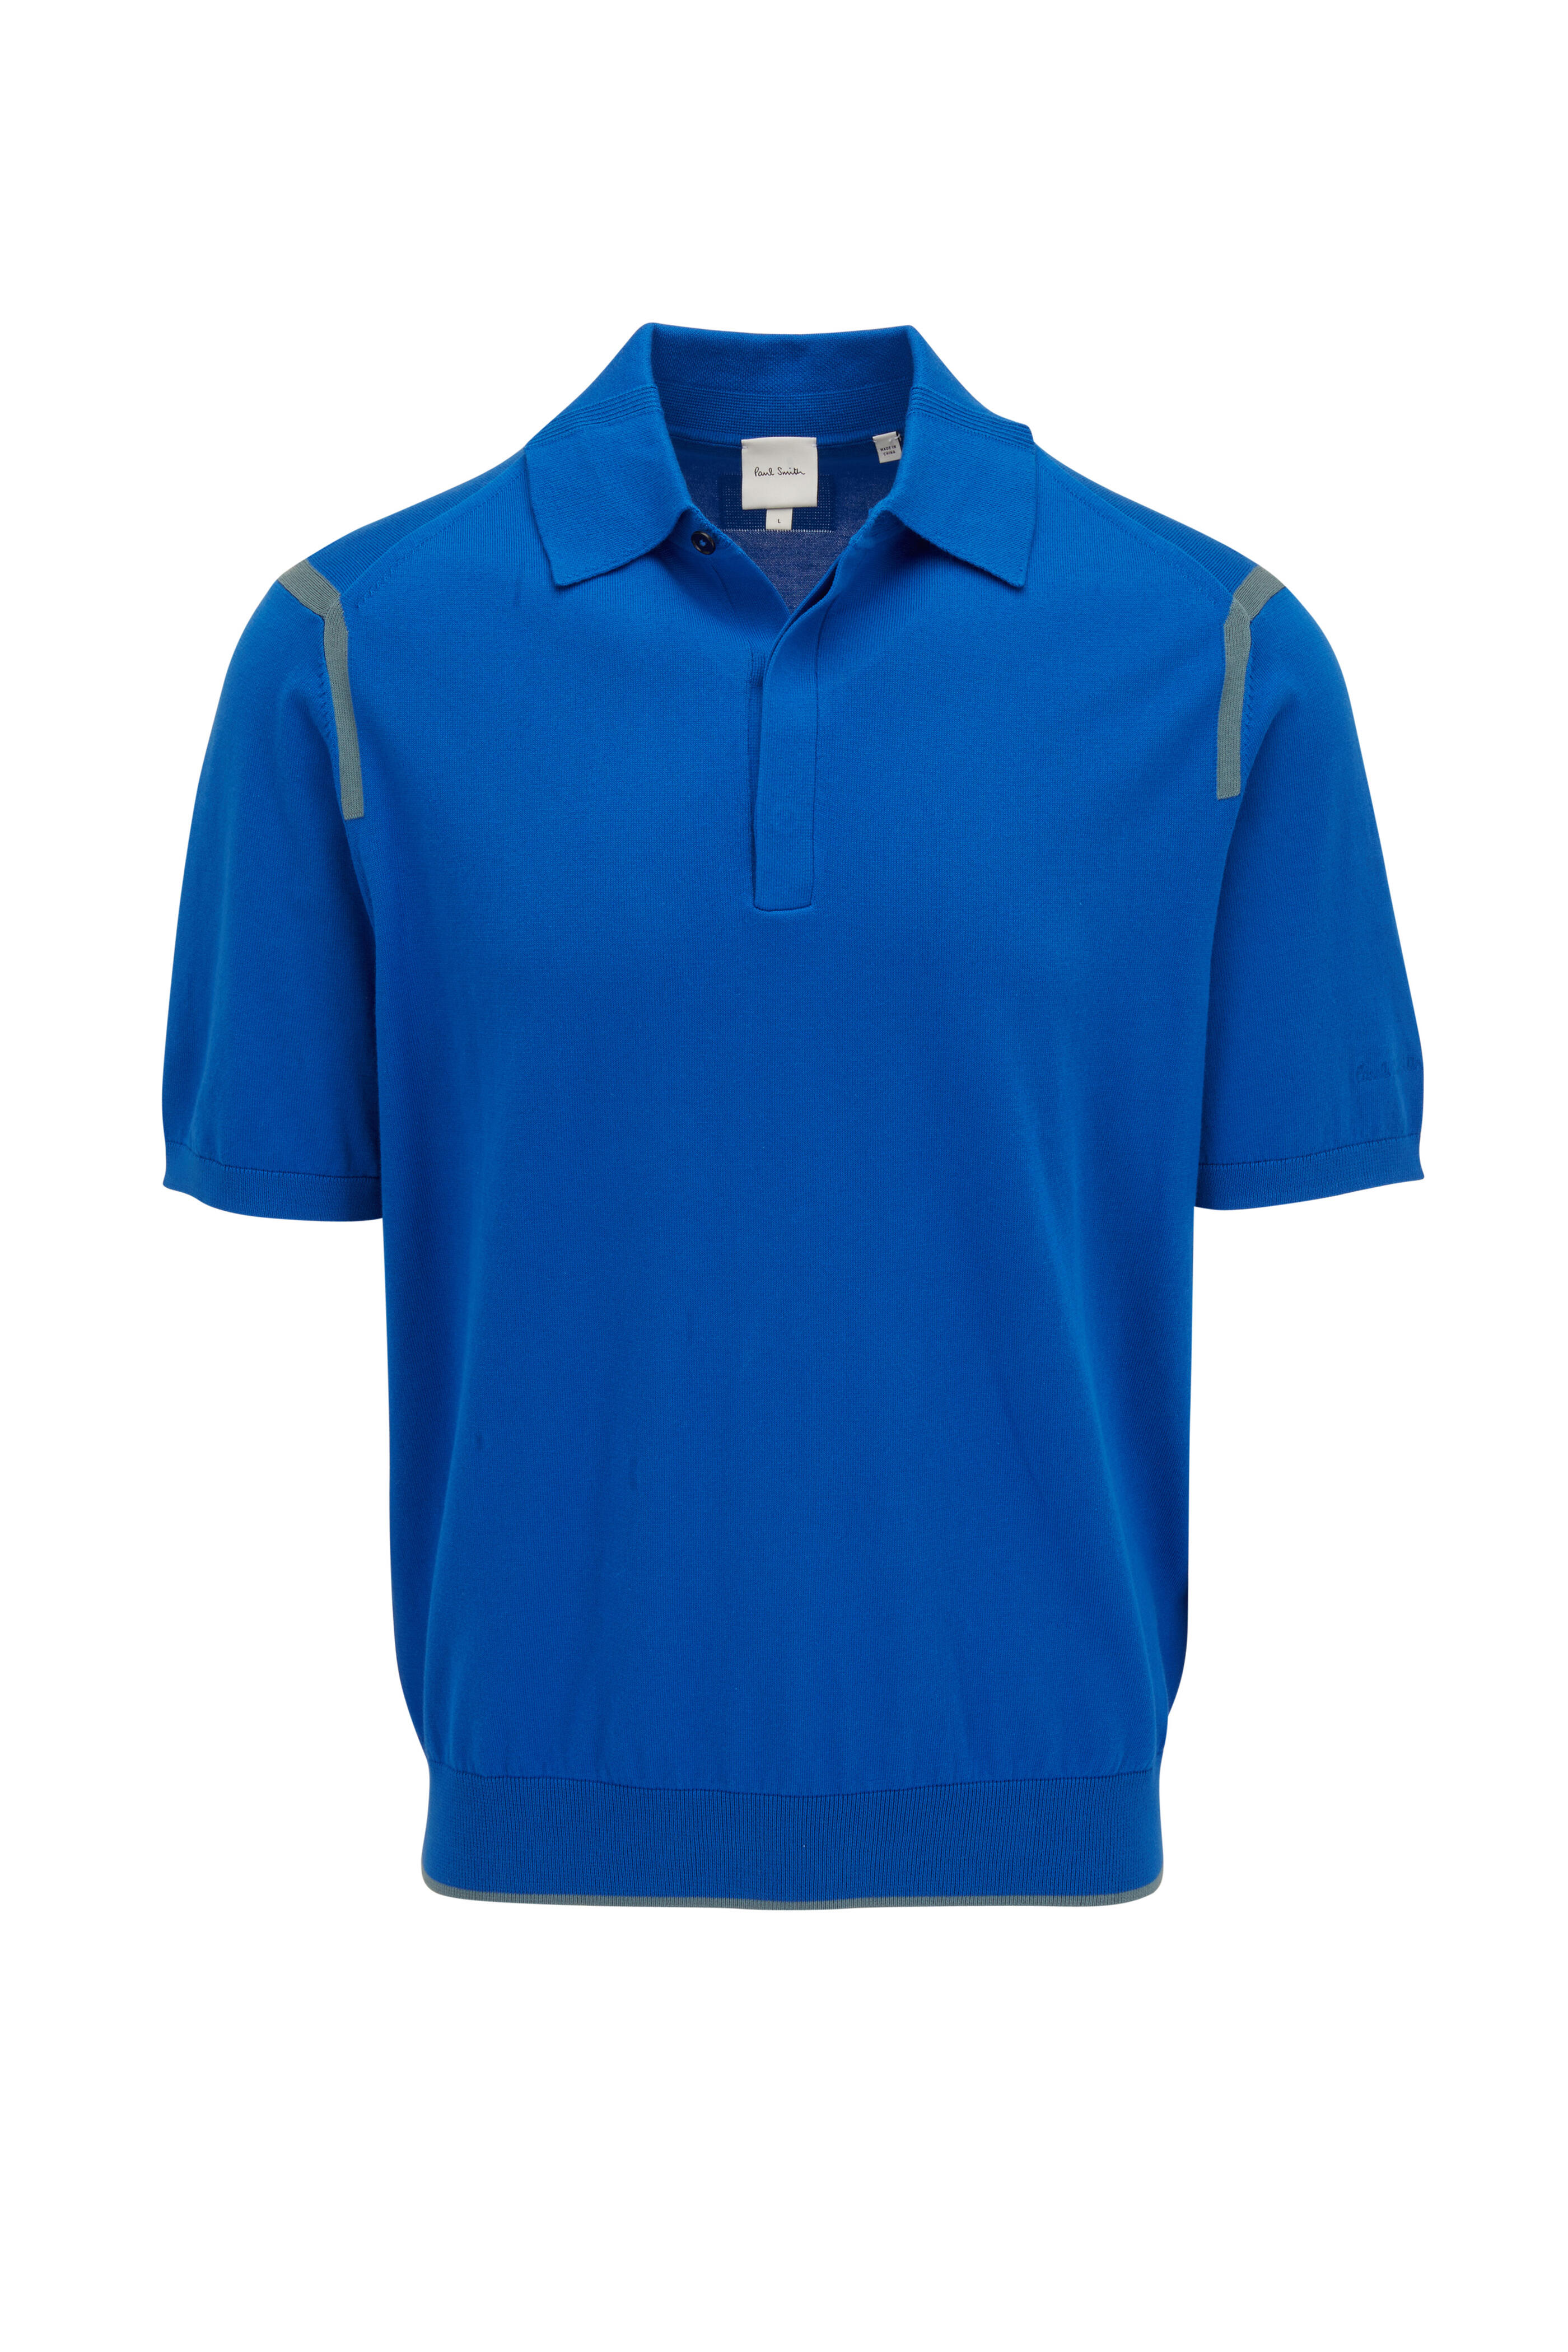 Paul Smith - Royal Blue Raglan Tipped Polo | Mitchell Stores